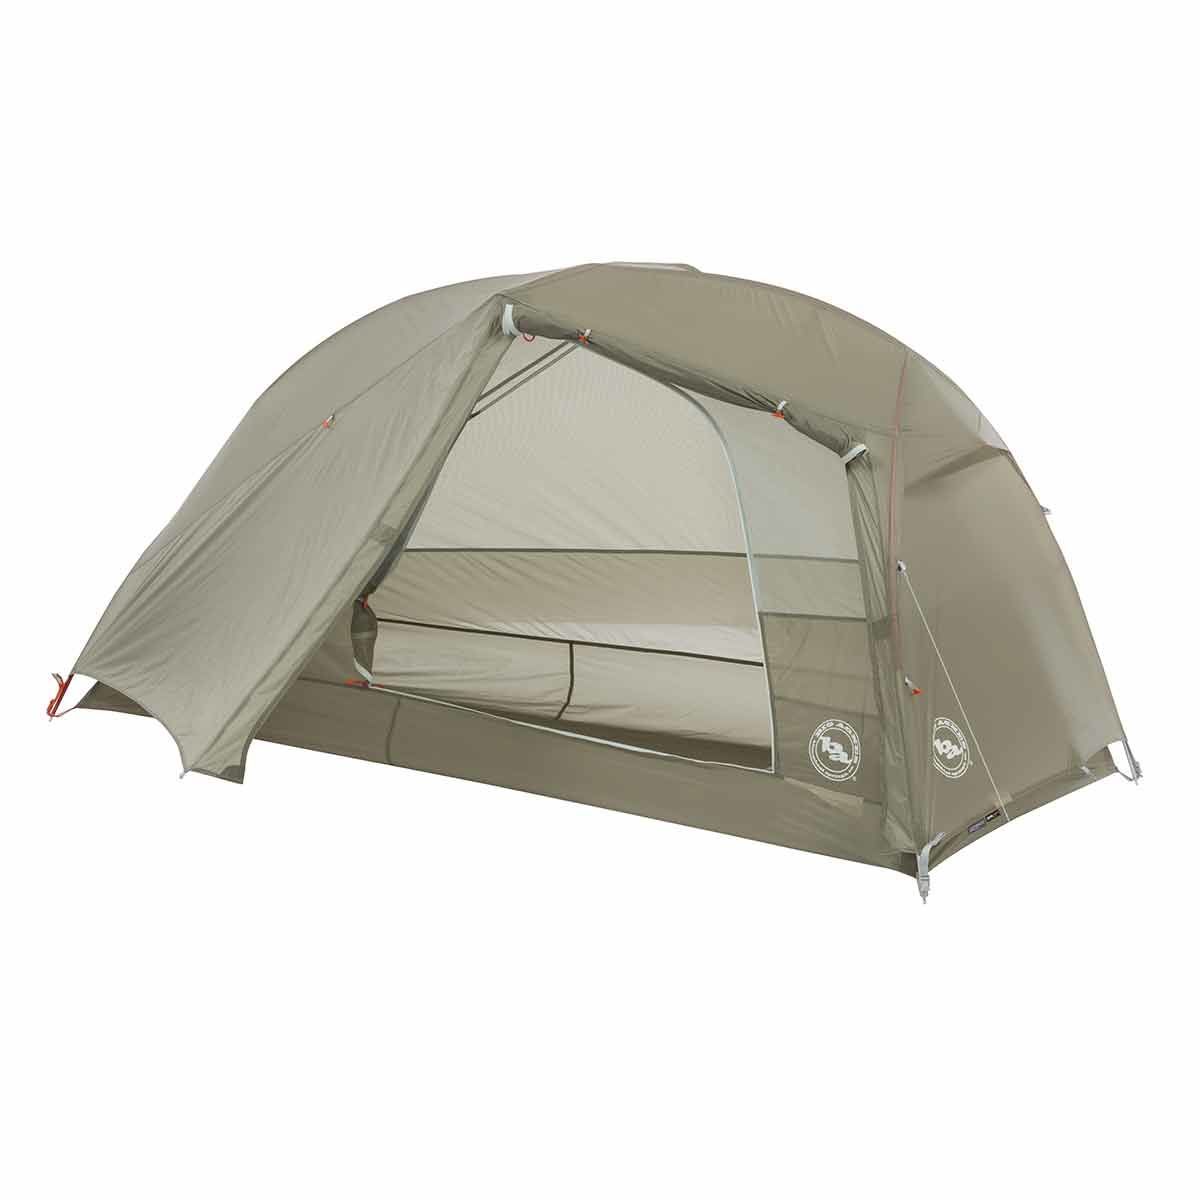 Big Agnes Copper Spur HV UL1 backpacking tent - 1 person